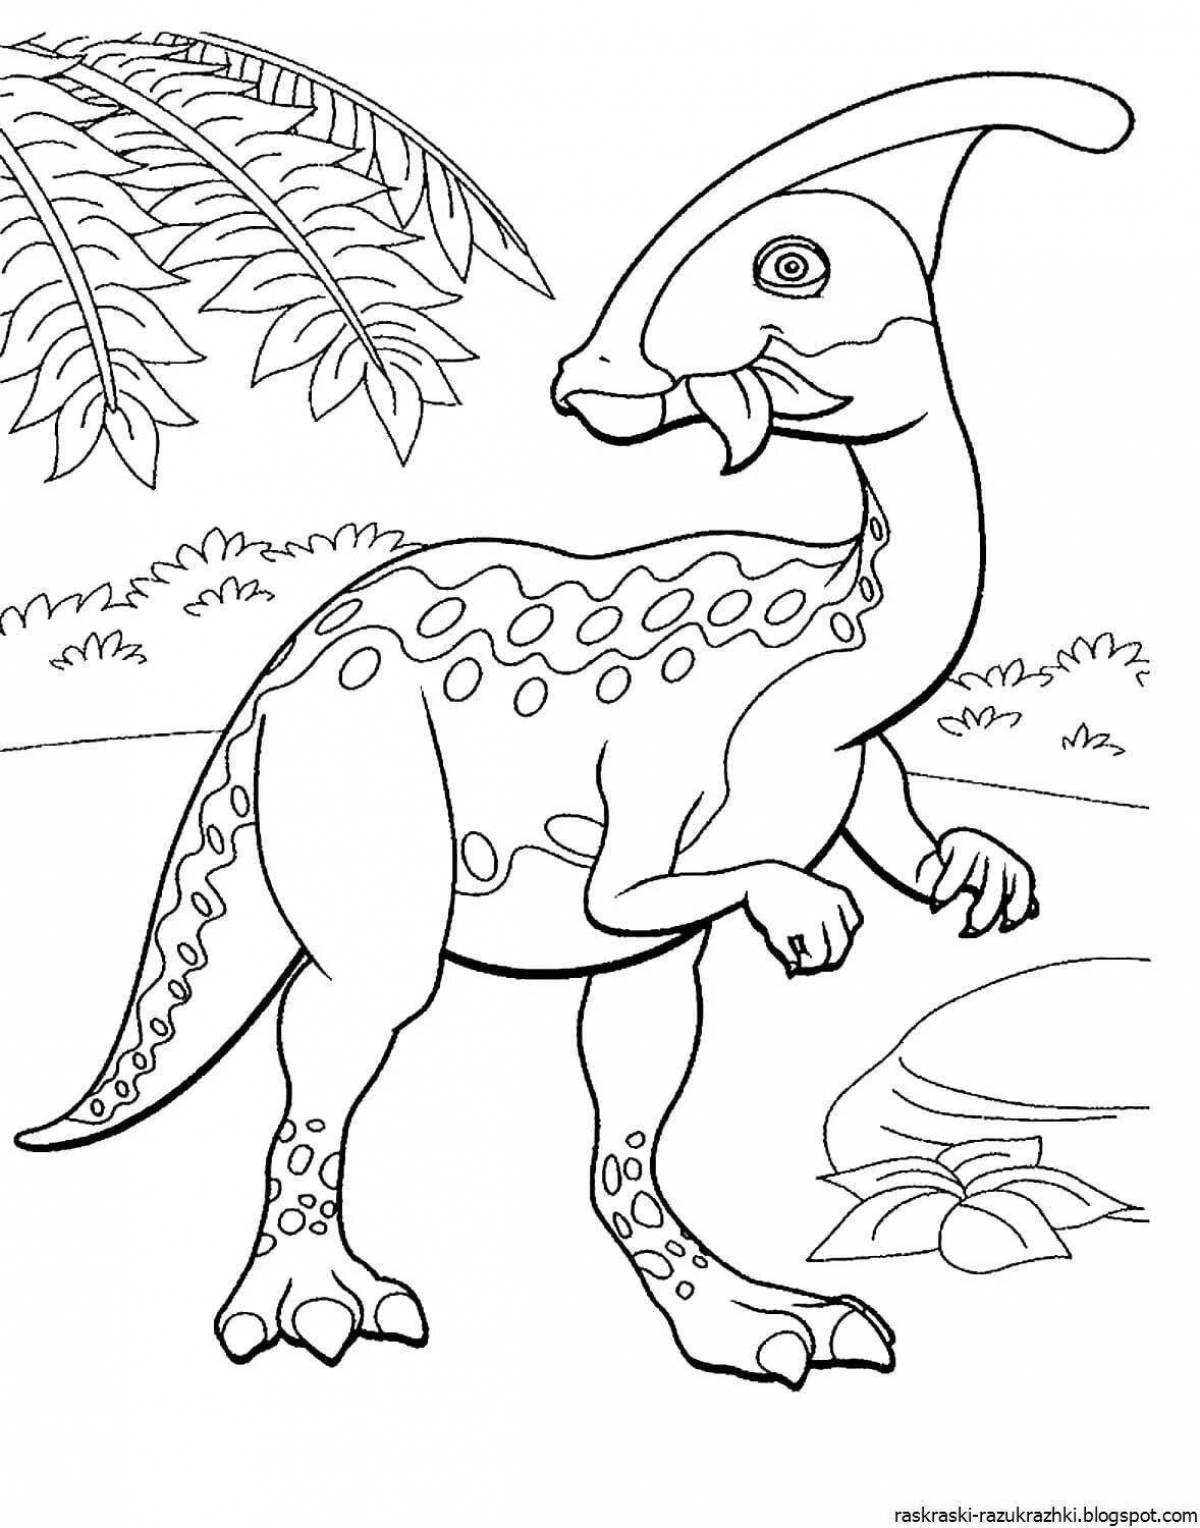 A fascinating dinosaur coloring book for boys 7 years old